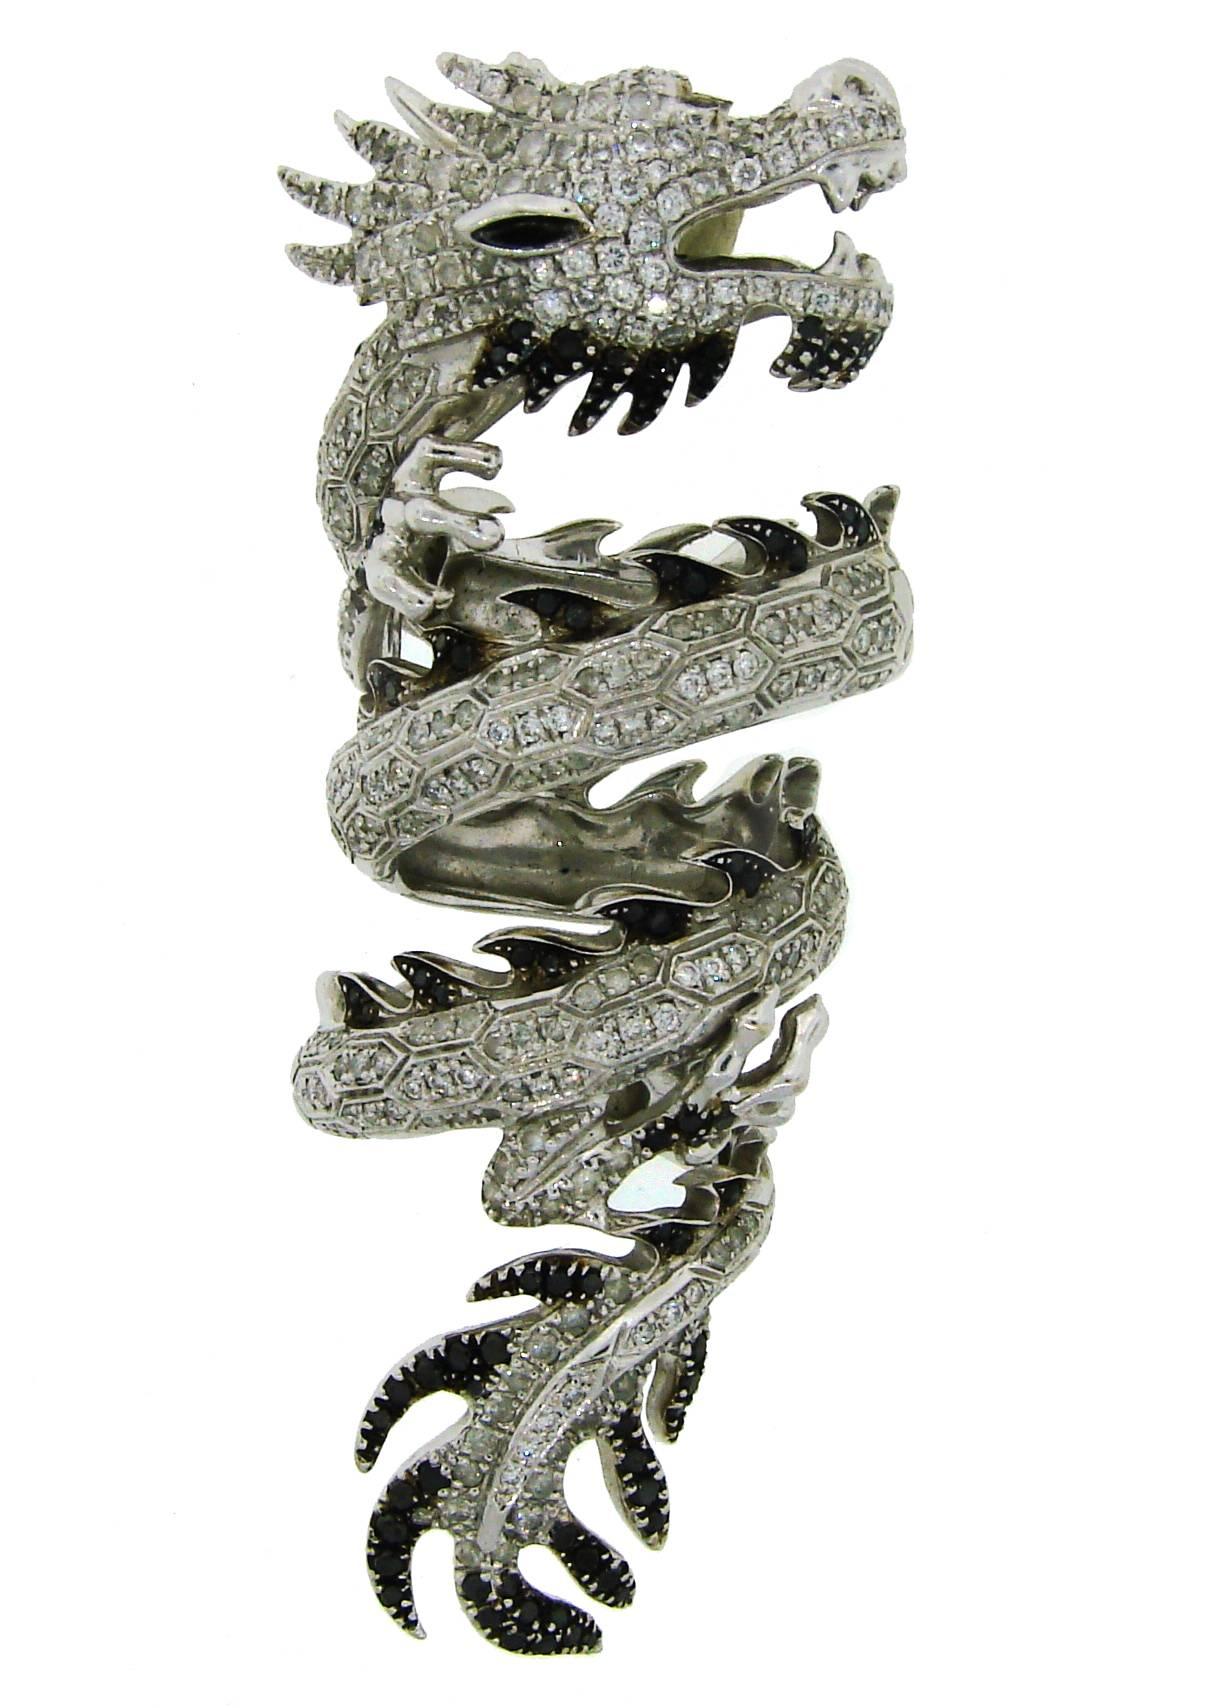 Stunning dragon ring created by a Parisian designer Elise Dray. She creates a dreamlike, fantastic universe with a hint on naturalism art, inspired by the animal kingdom, offers wild and original creations. This articulated ring is a perfect example